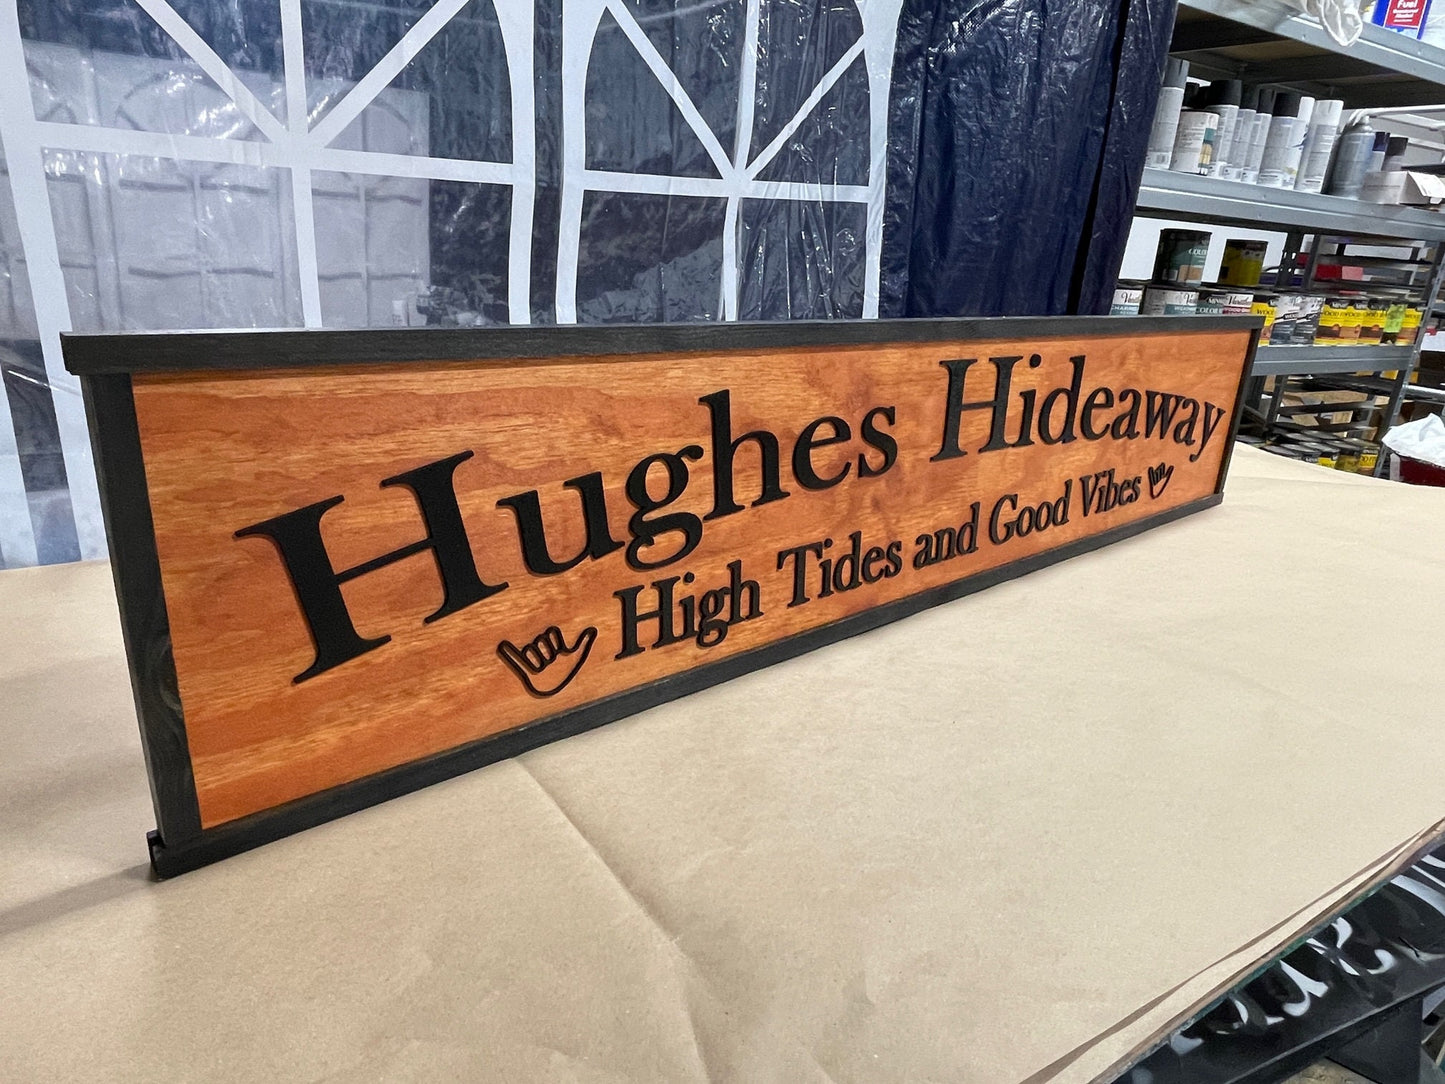 Large Custom Ranch Sign High Tides Good Vibes Over-sized Rustic Business Logo Wood Laser Cut Out 3D Extra Large Sign Footstepsinthepast